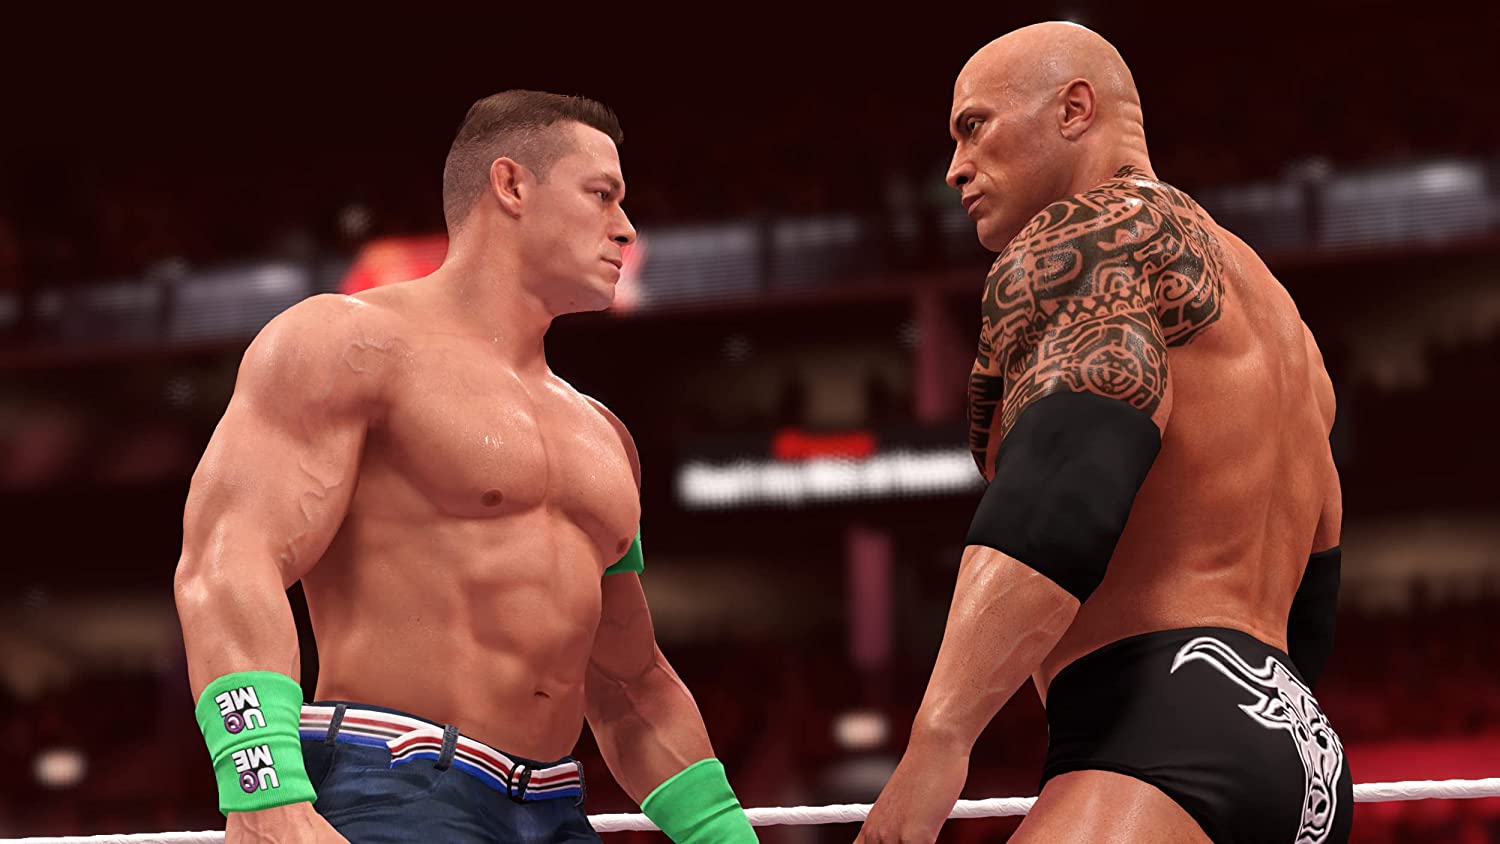 WWE 2K22 Servers Are Shutting Down. Here Is What 2K Games Want You To Do